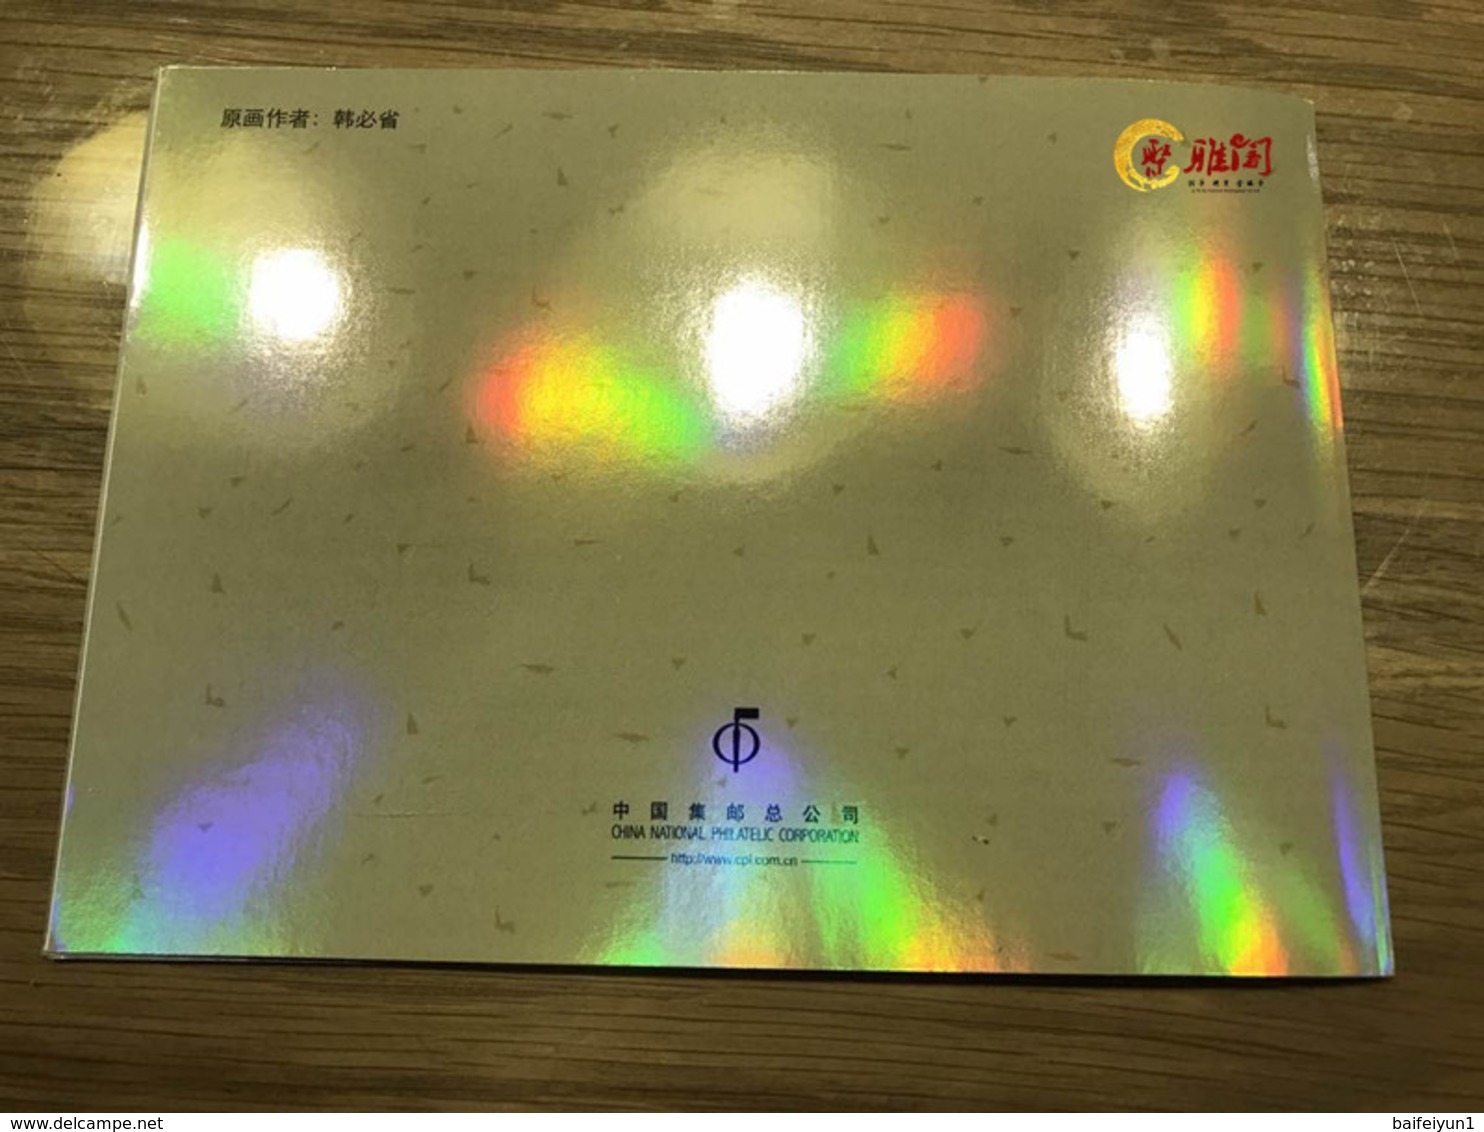 China 2016-1 Intelligent Monkey Celebrating The New Year Special S/S Booklet(Cover Is Holographic) - Hologramme